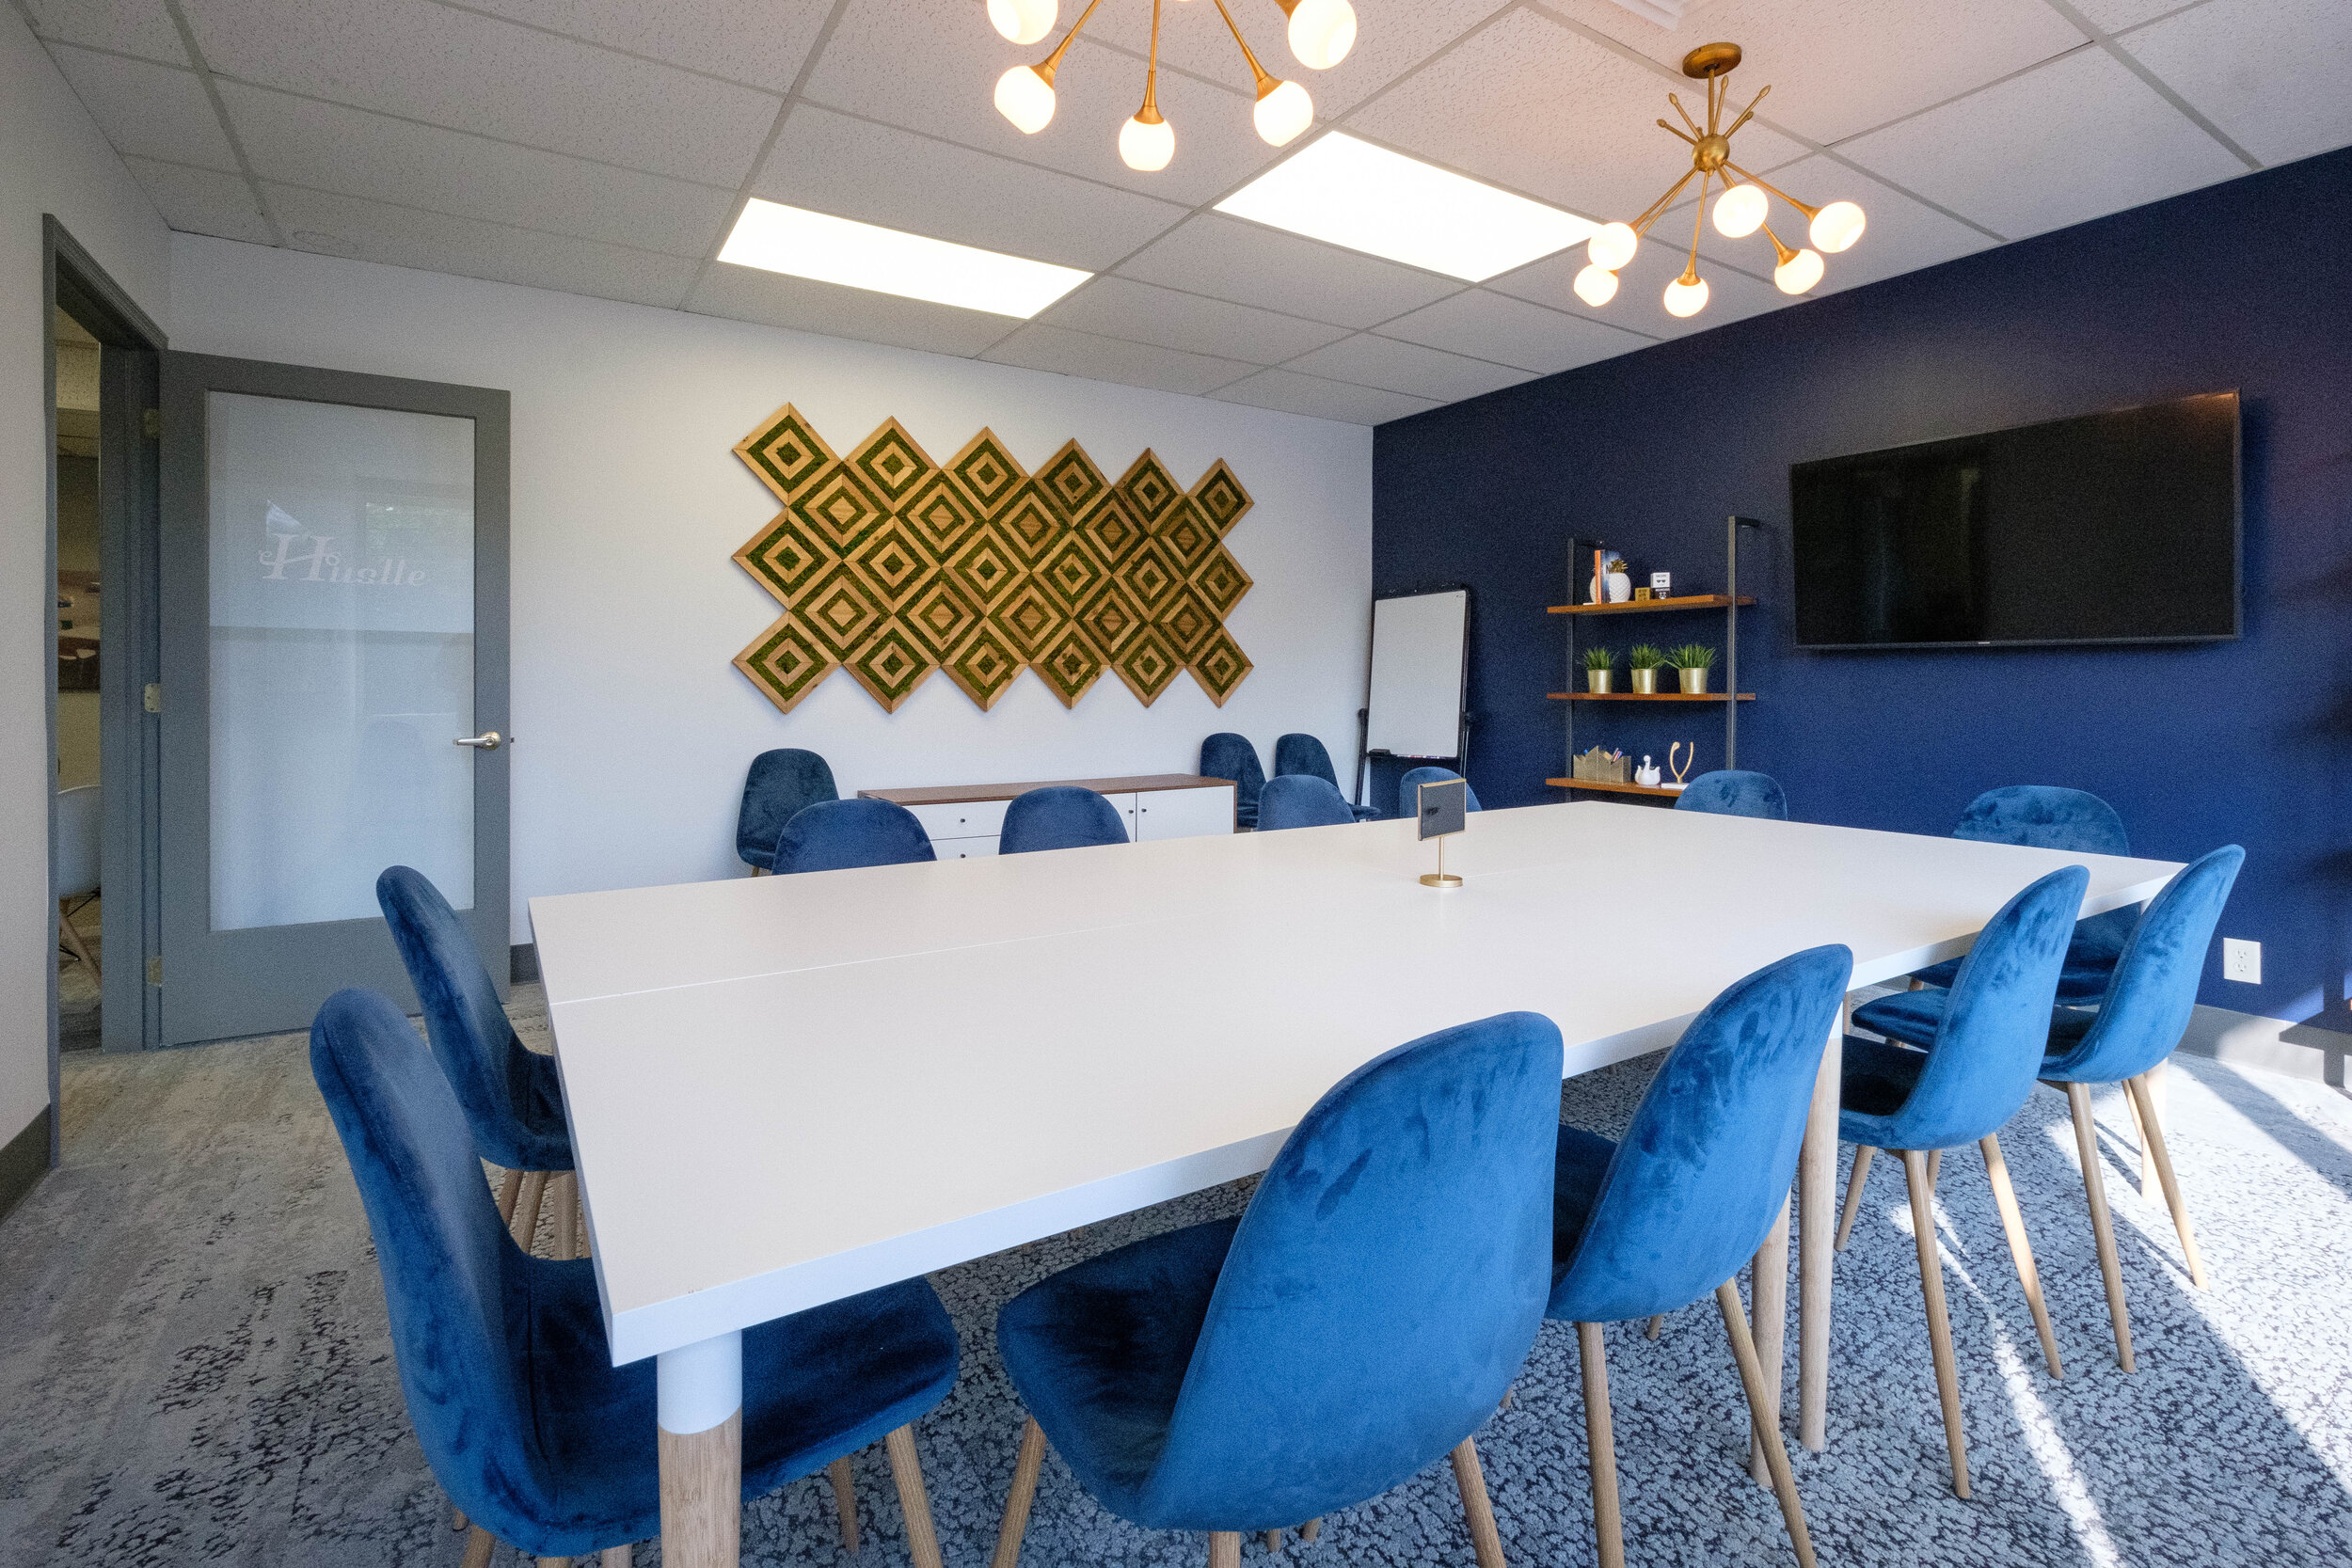  When you find you have a meeting with colleagues or clients on the calendar, our conference rooms make great spaces to hunker down. Each conference room provides you privacy, space to distance, white boards to brainstorm, and wireless presenting to 